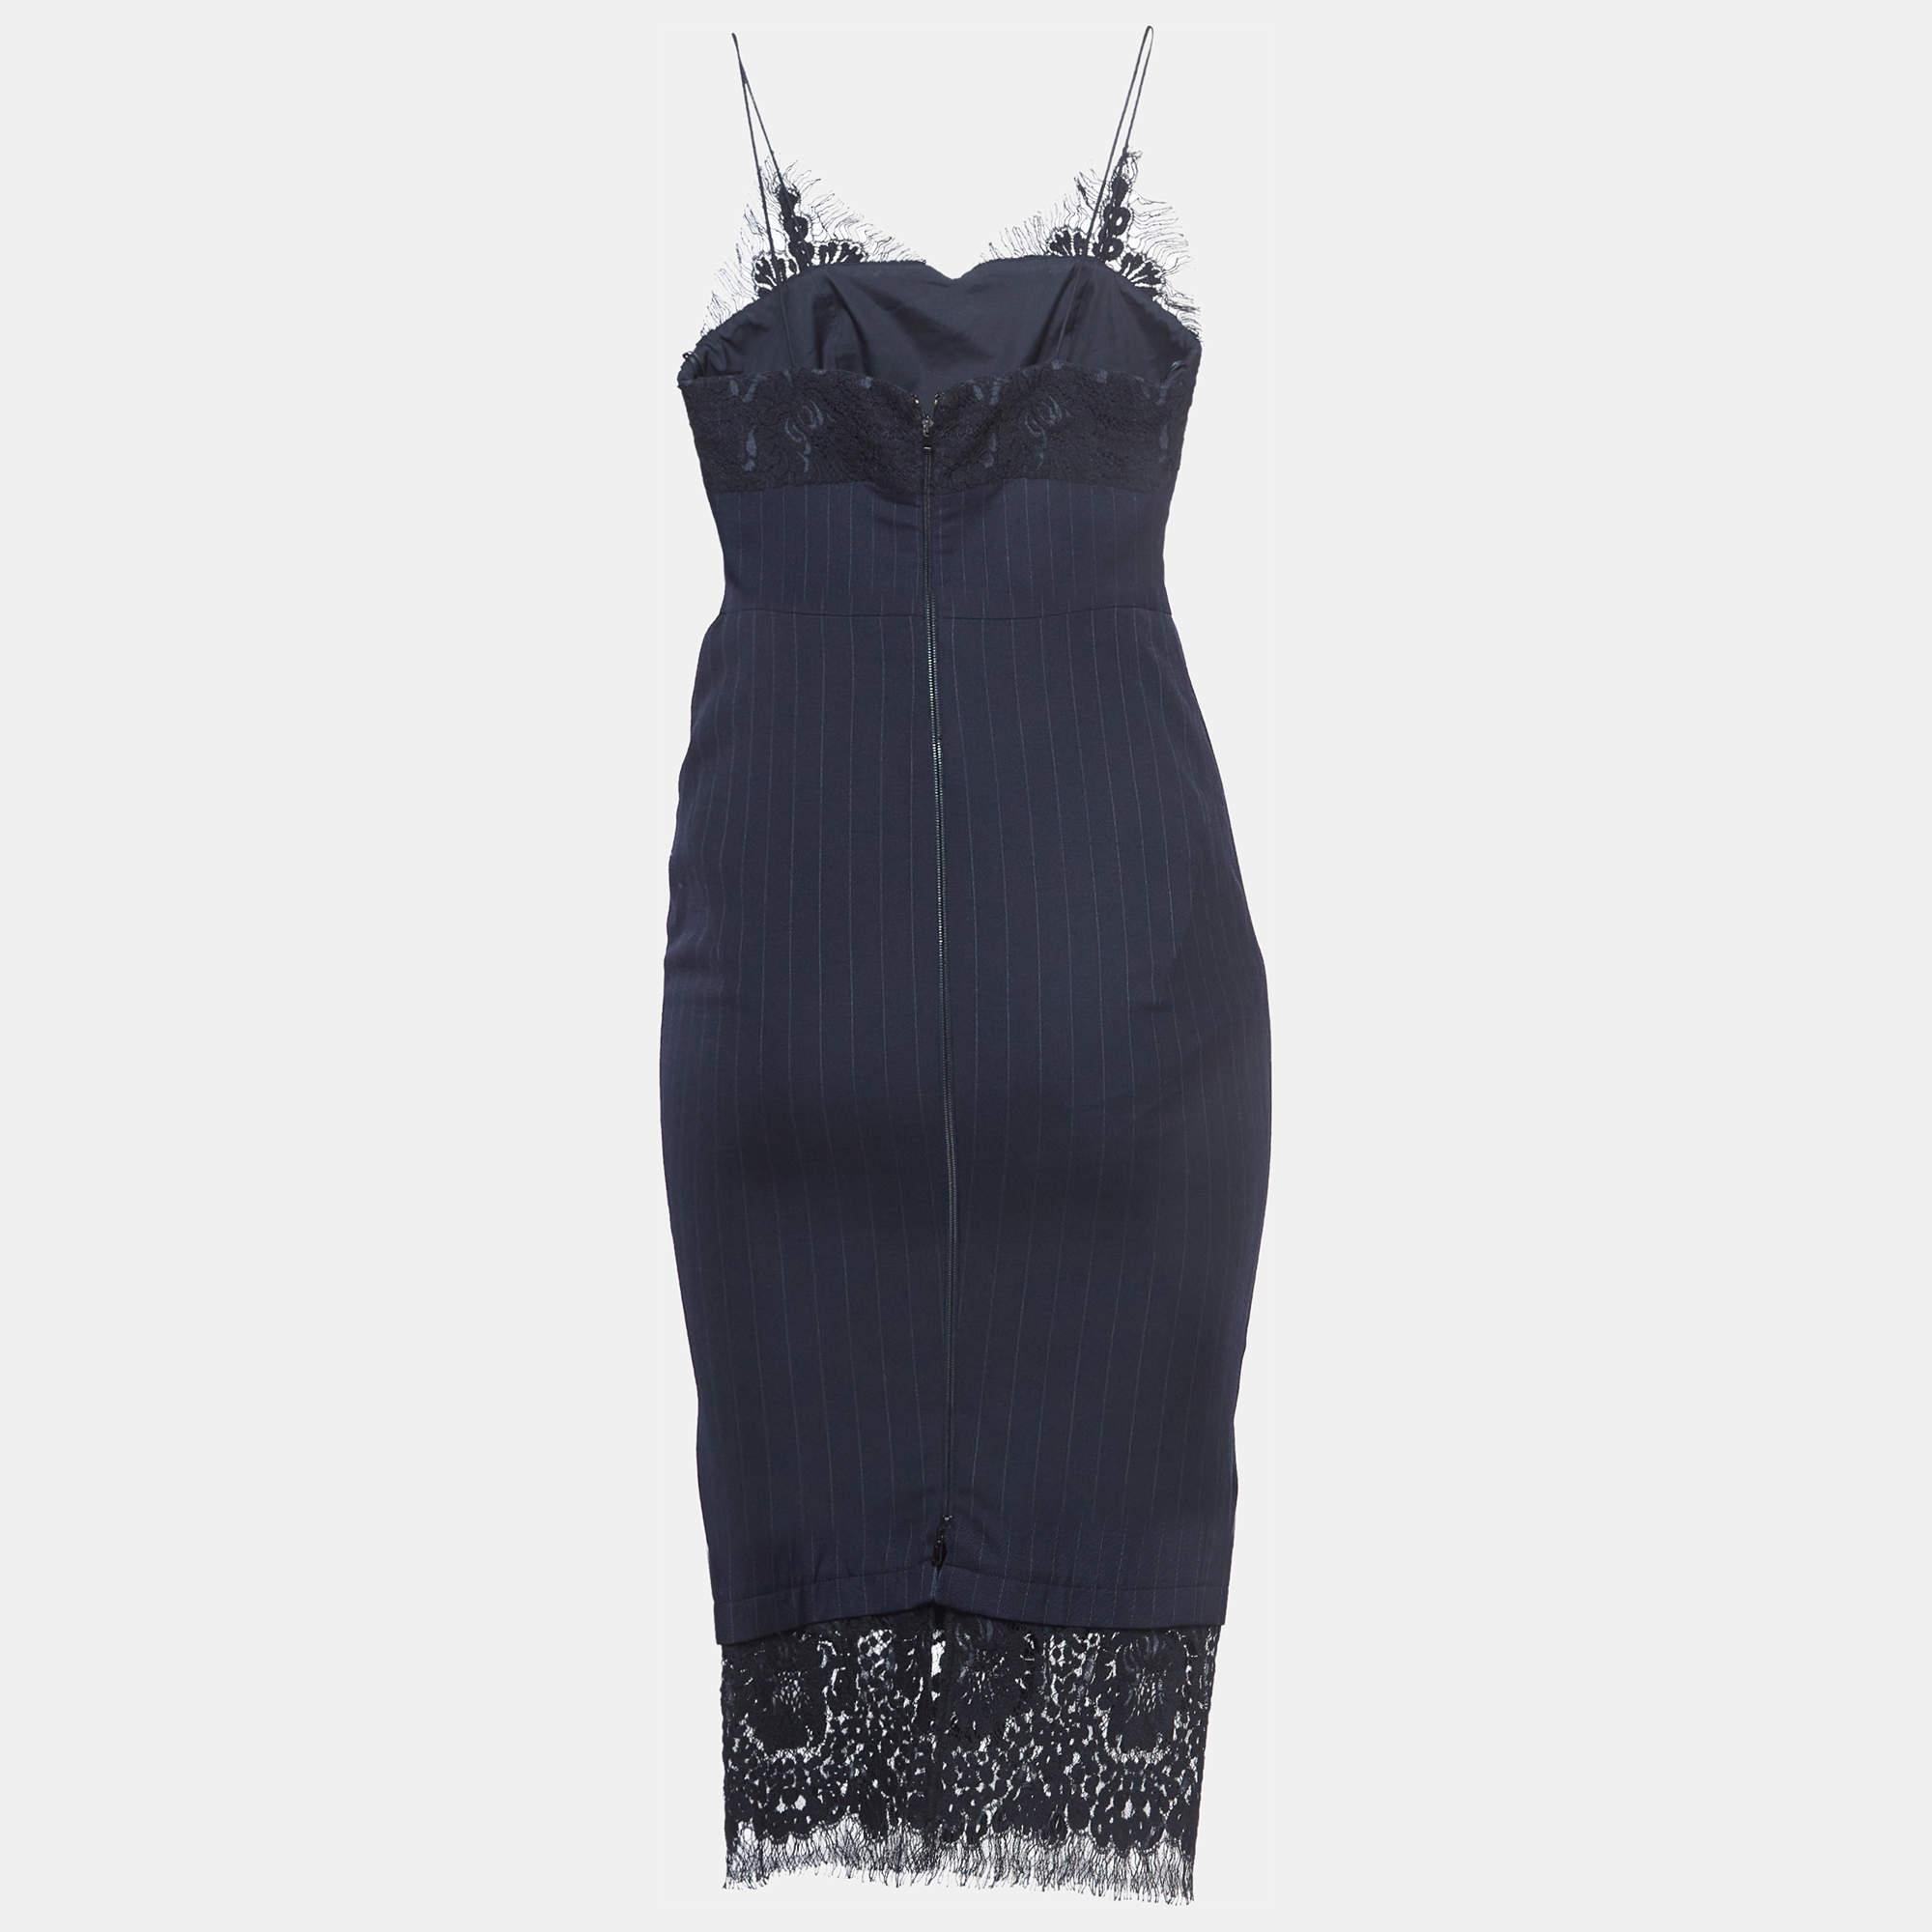 Women's Victoria Beckham Navy Blue Pinstriped Wool Lace-Trimmed Midi Dress S For Sale